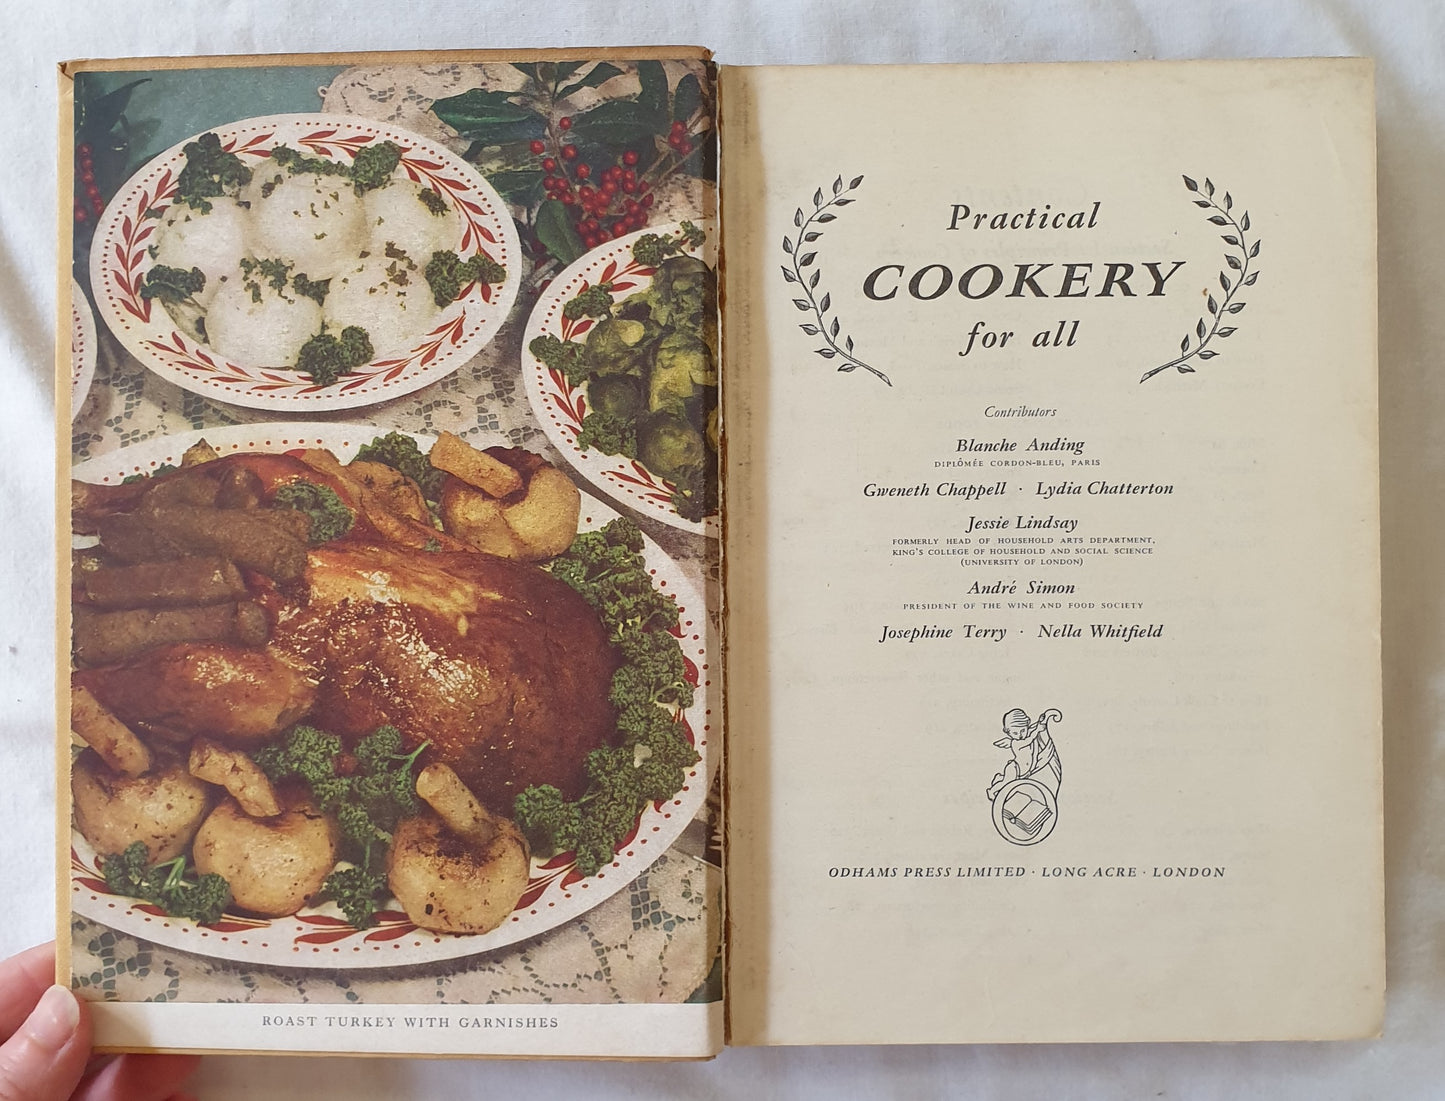 Practical Cookery for All  by Blanche Anding, Gweneth Chappell, Lydia Chatterton, Jessie Lindsay, Andre Simon, Josephine Terry, Nella Whitfield